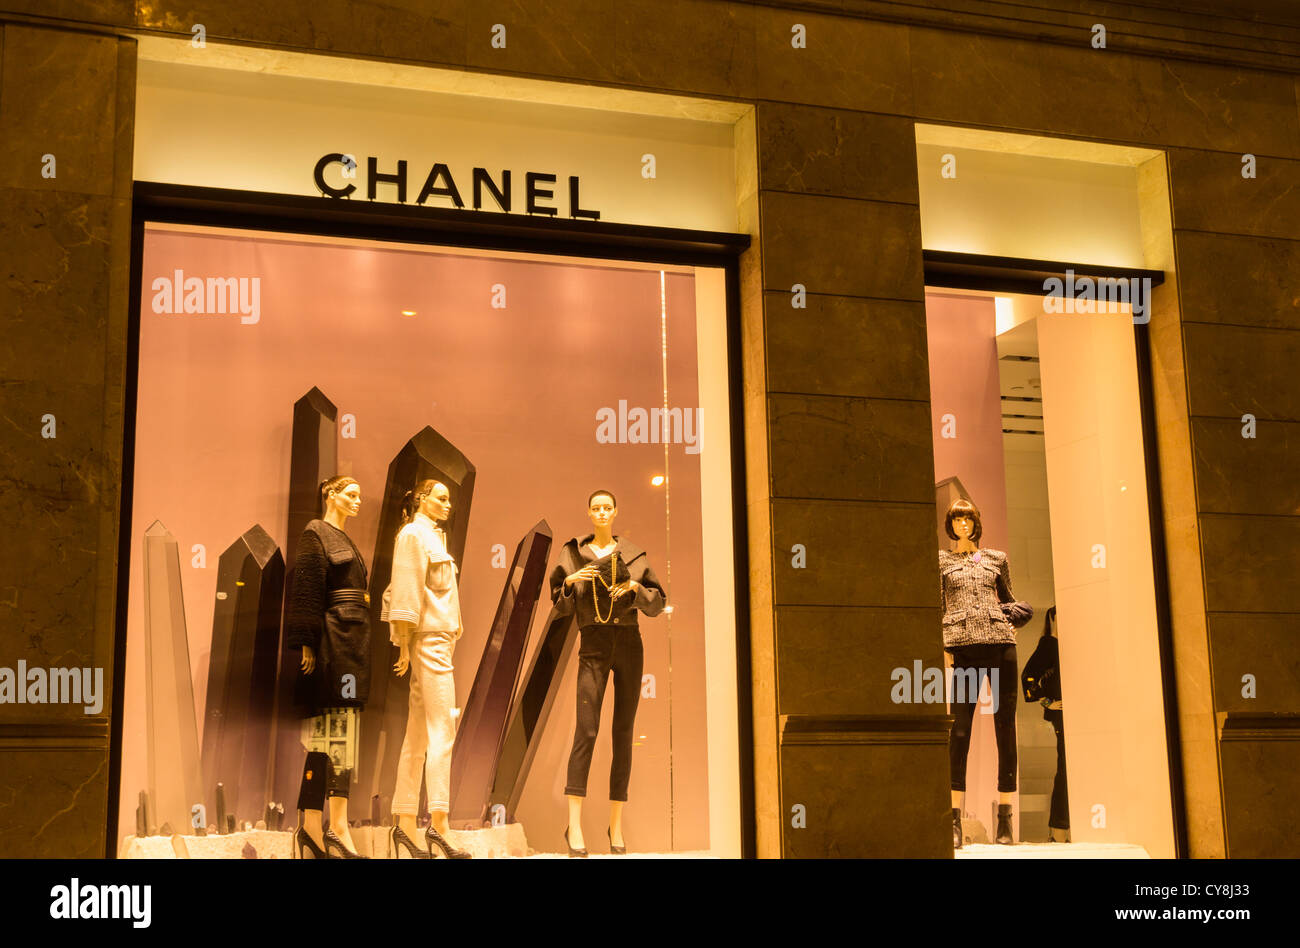 Chanel Strung Up By Nordstrom  Window display design, Display design,  Window display